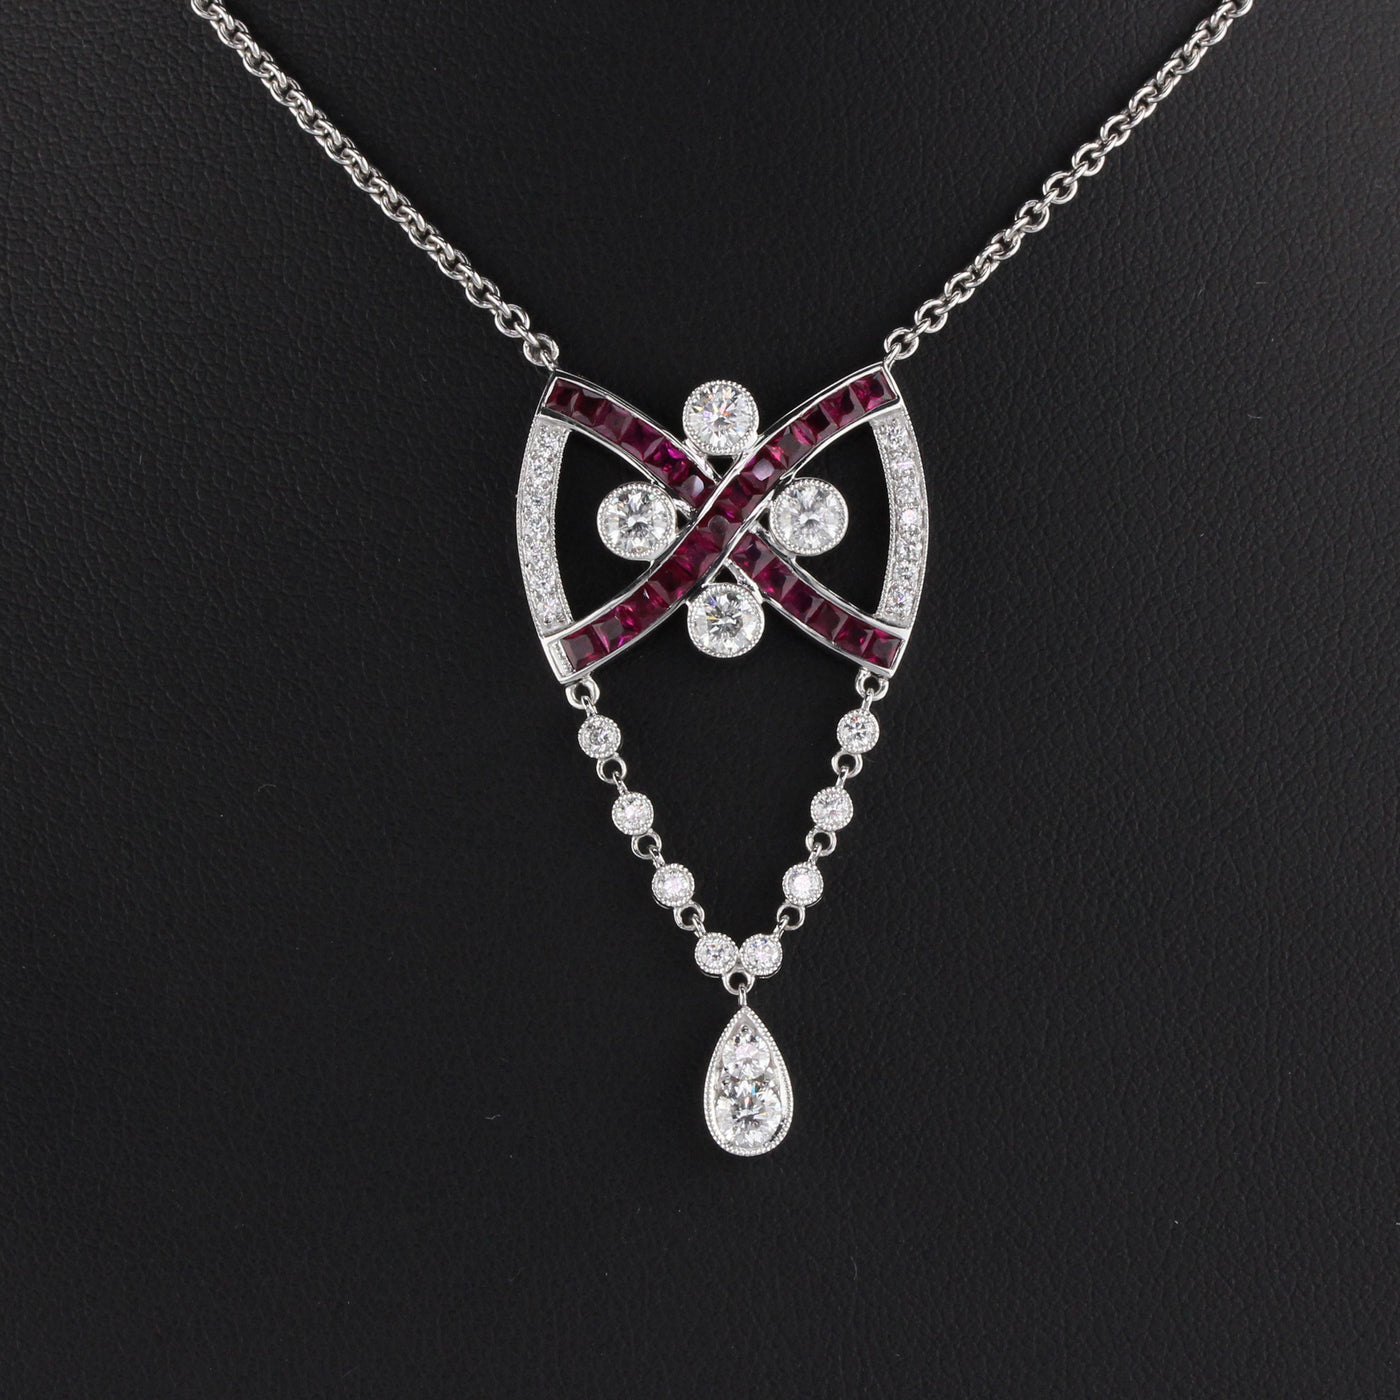 Vintage Estate 18K White Gold Diamond and Ruby Necklace